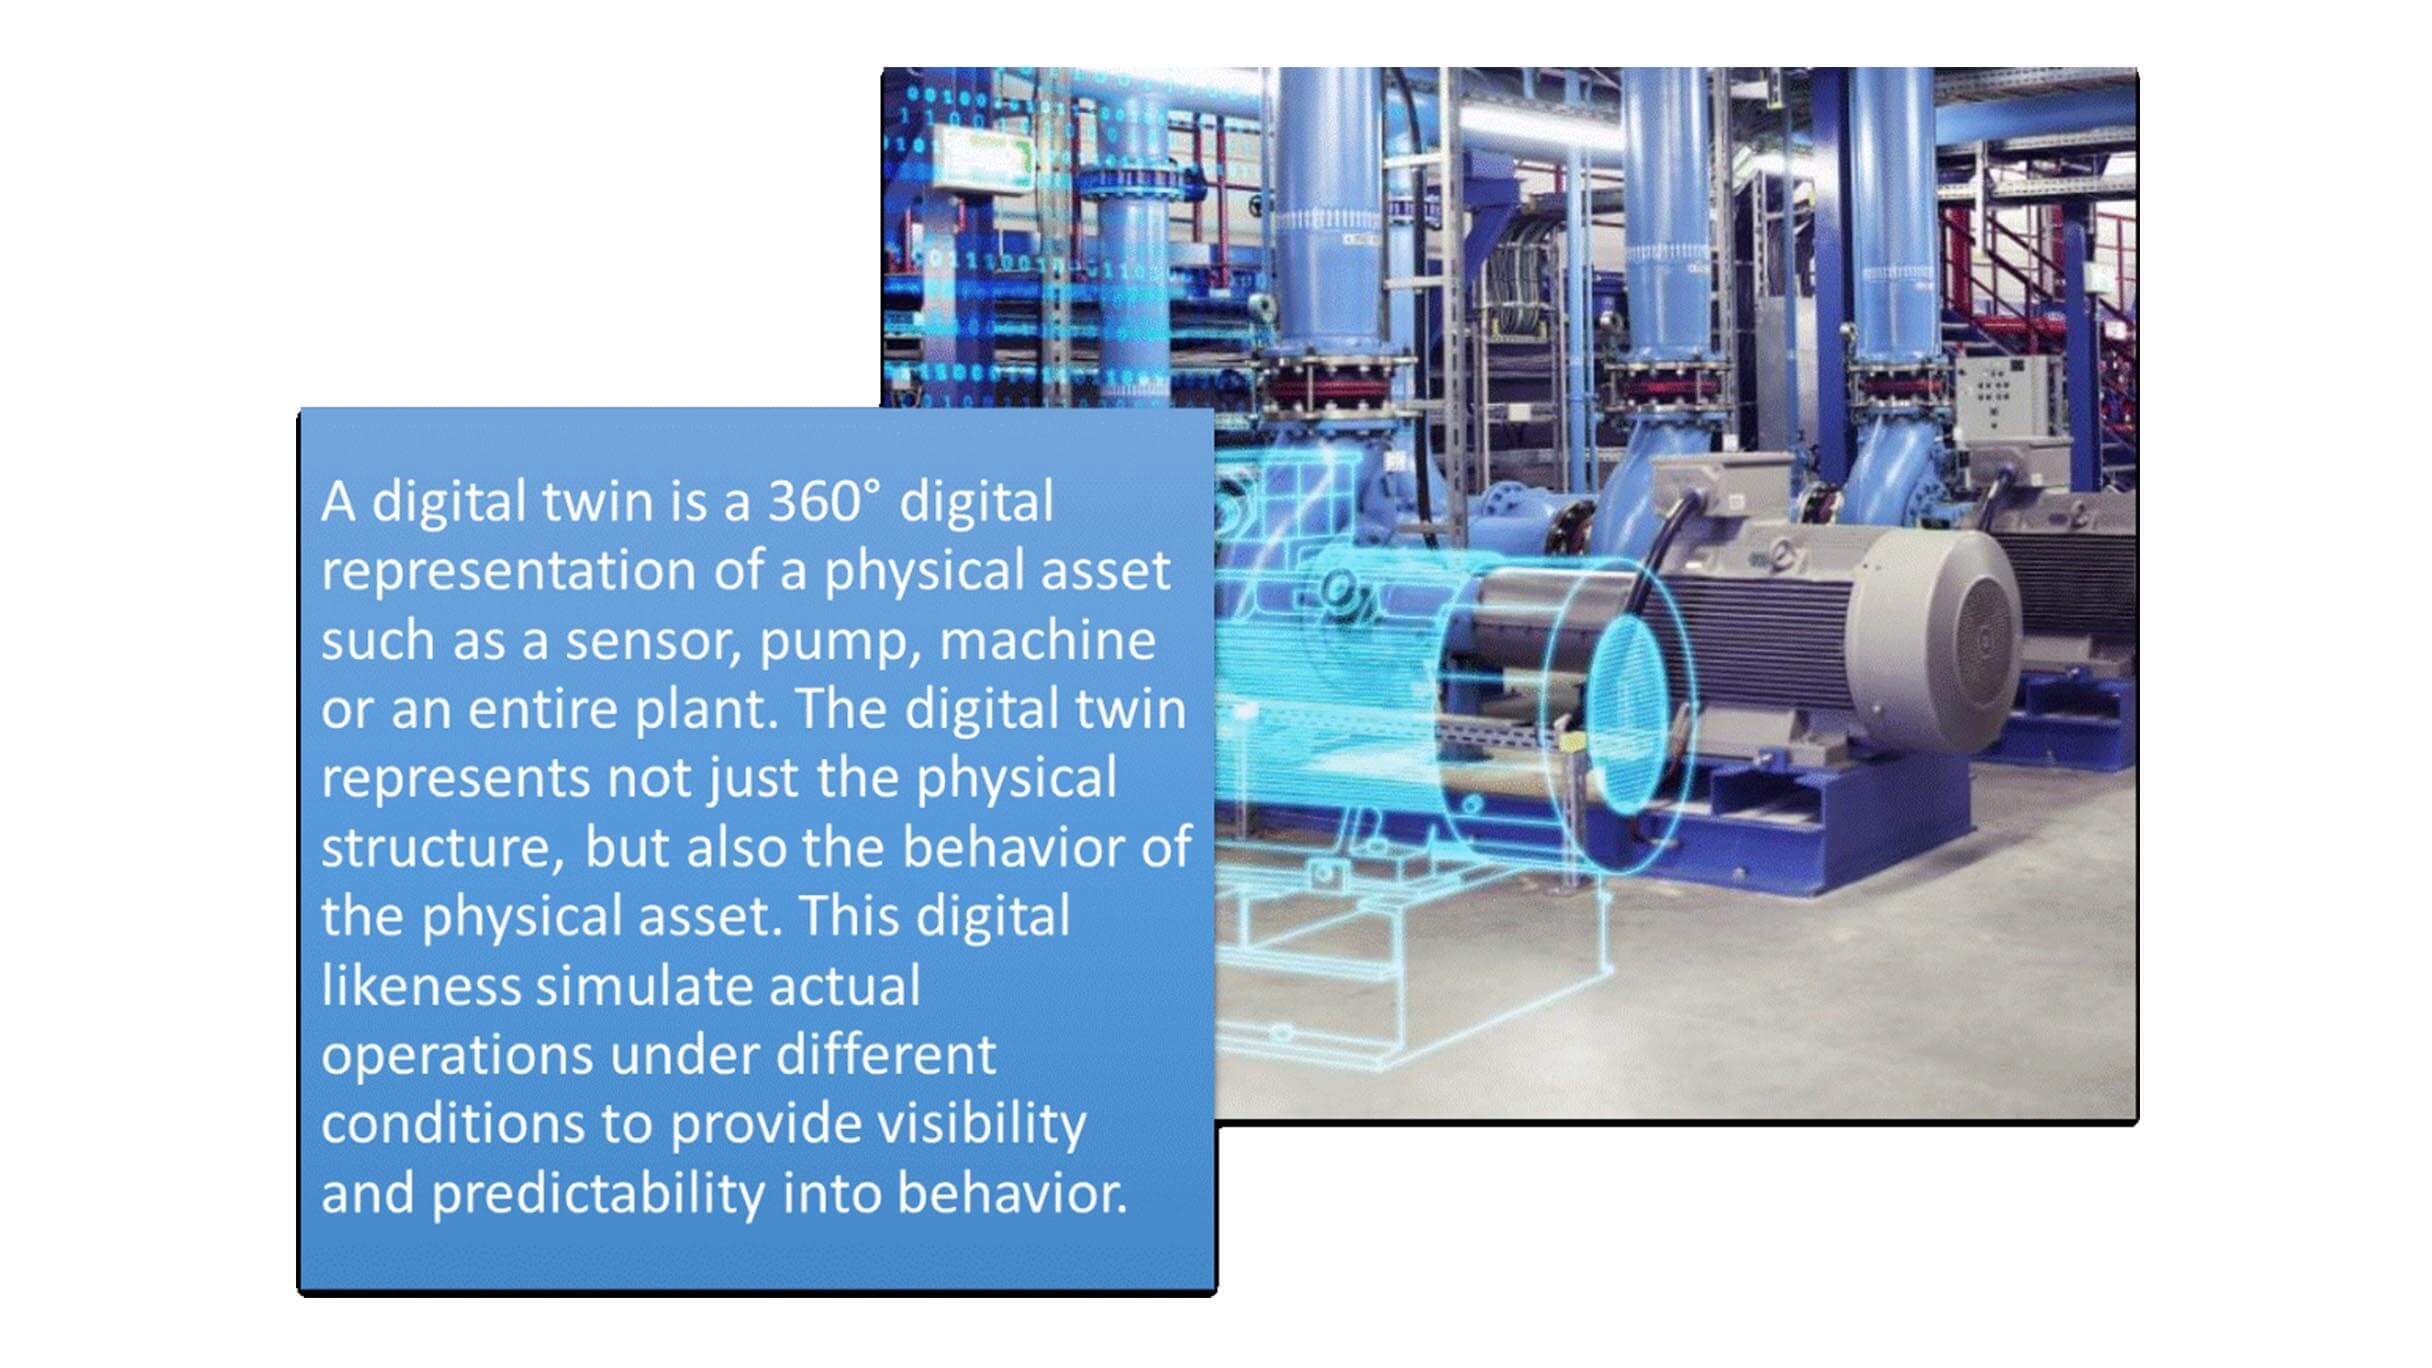 Next Generation MES Technologies include digital twins